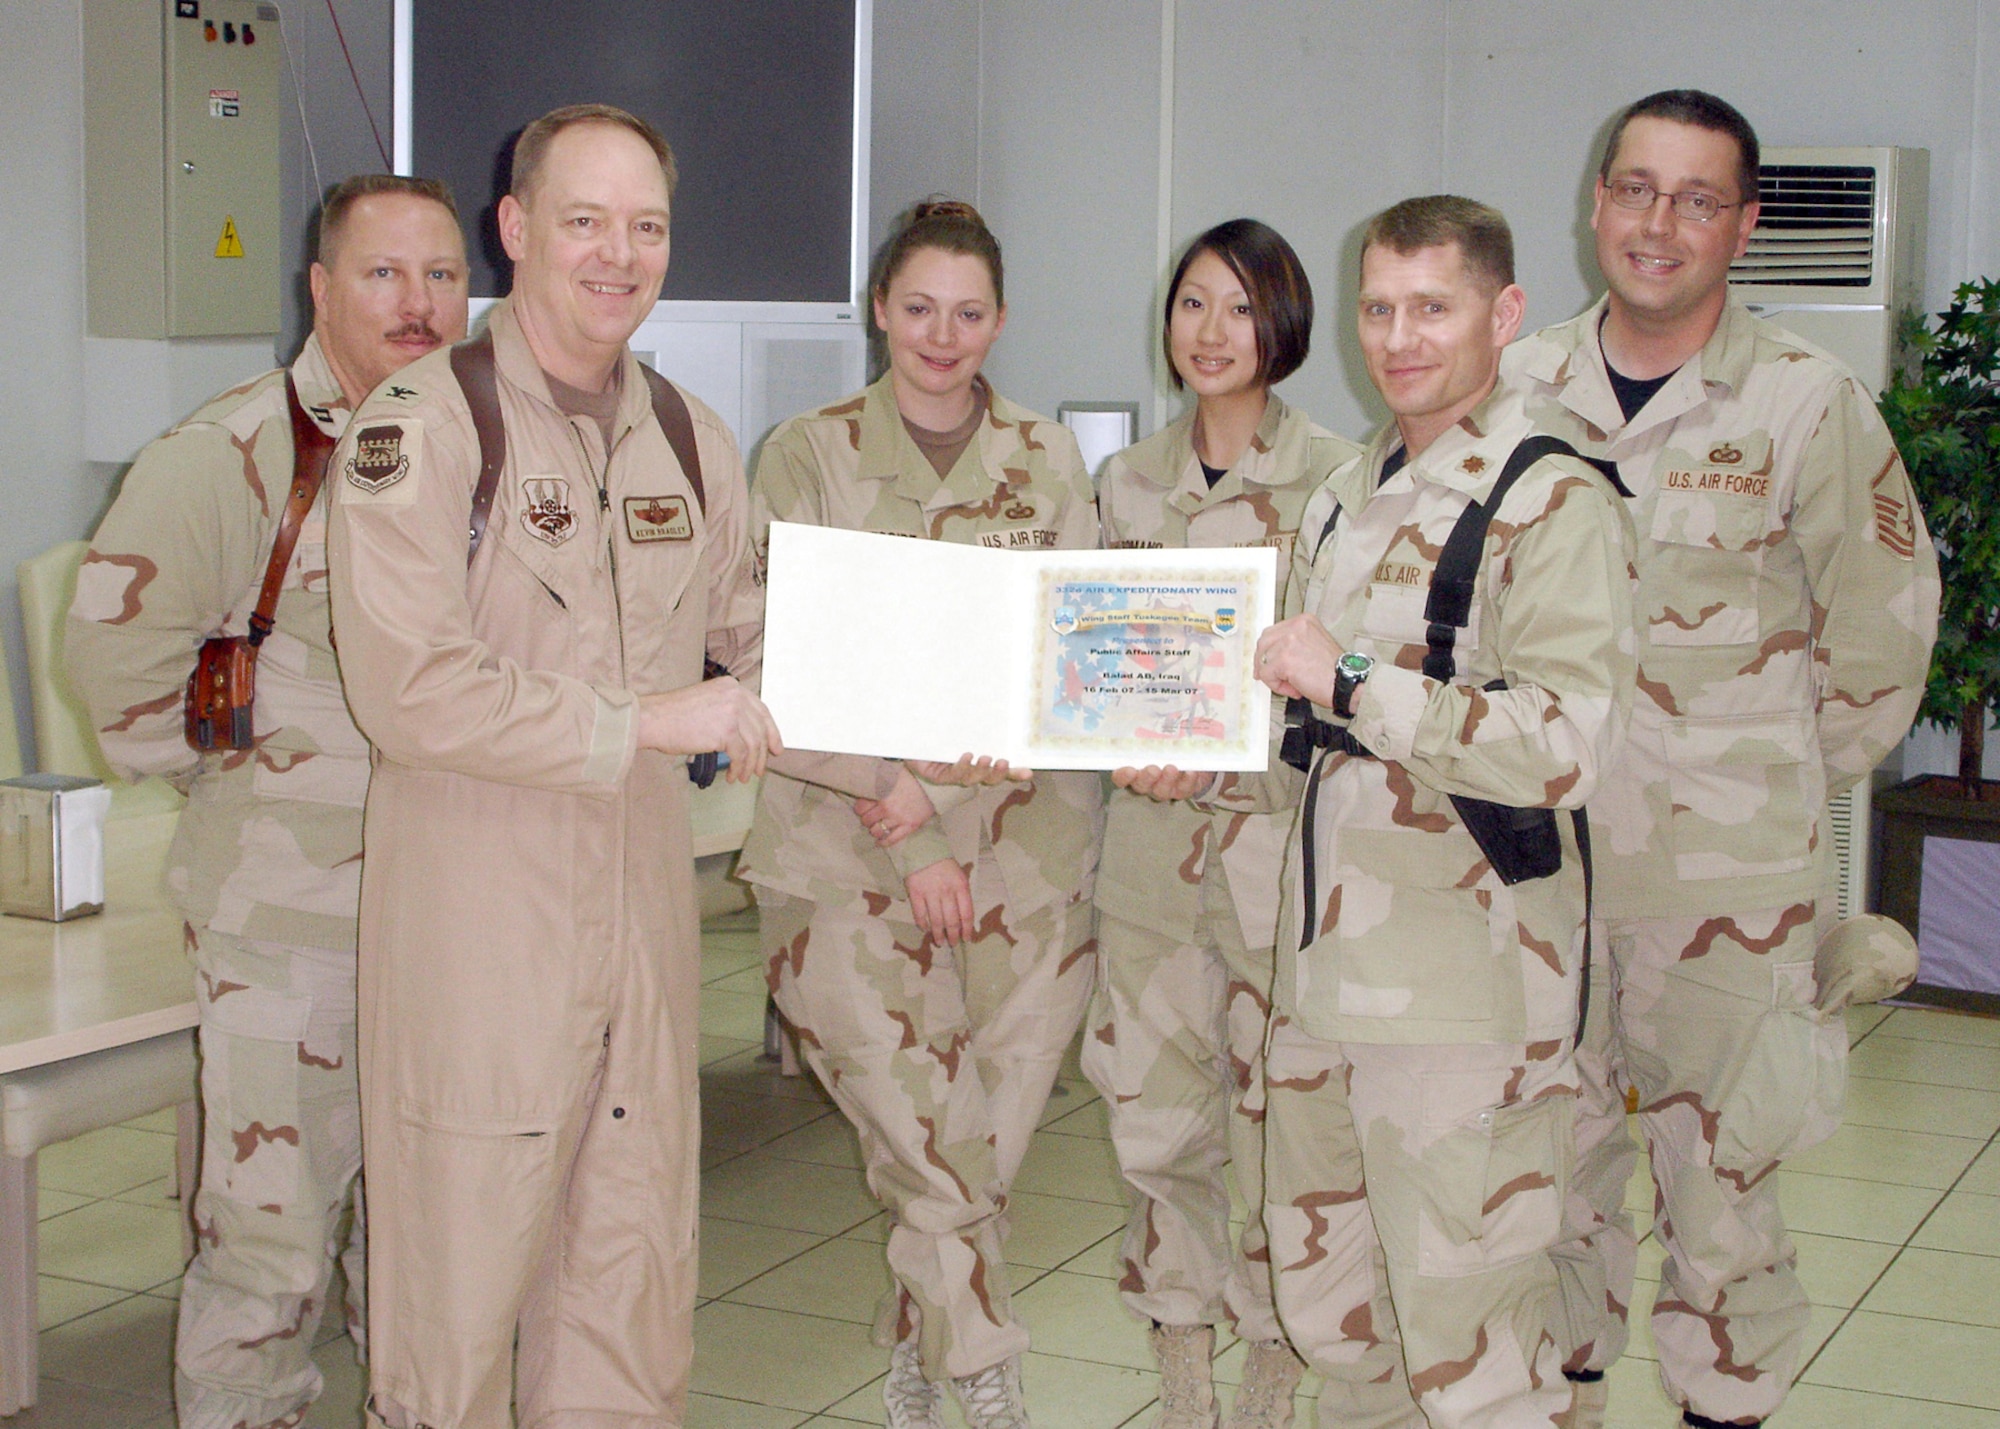 BALAD AB, Iraq— Col. Kevin Bradley, 332nd Air Expeditionary Wing Director of Staff, presents the March 2007 Wing Staff Team of the Month award to the 332nd AEW Public Affairs office staff.  From left to right: Capt. Ken Hall, Col Bradley, Senior Airman Candace Romano, Tech. Sgt. Jennifer Gregoire, Maj. Damien Pickart and Master Sgt. Bryan Ripple. Sergeant Ripple is currently deployed from the 910th Airlift Wing, Youngstown Air Reserve Station, where he serves as the Deputy Chief of the Public Affairs office. The staff was recognized for their efforts to communicate the wing's mission at the Air Force's premier combat airpower hub in Iraq.     